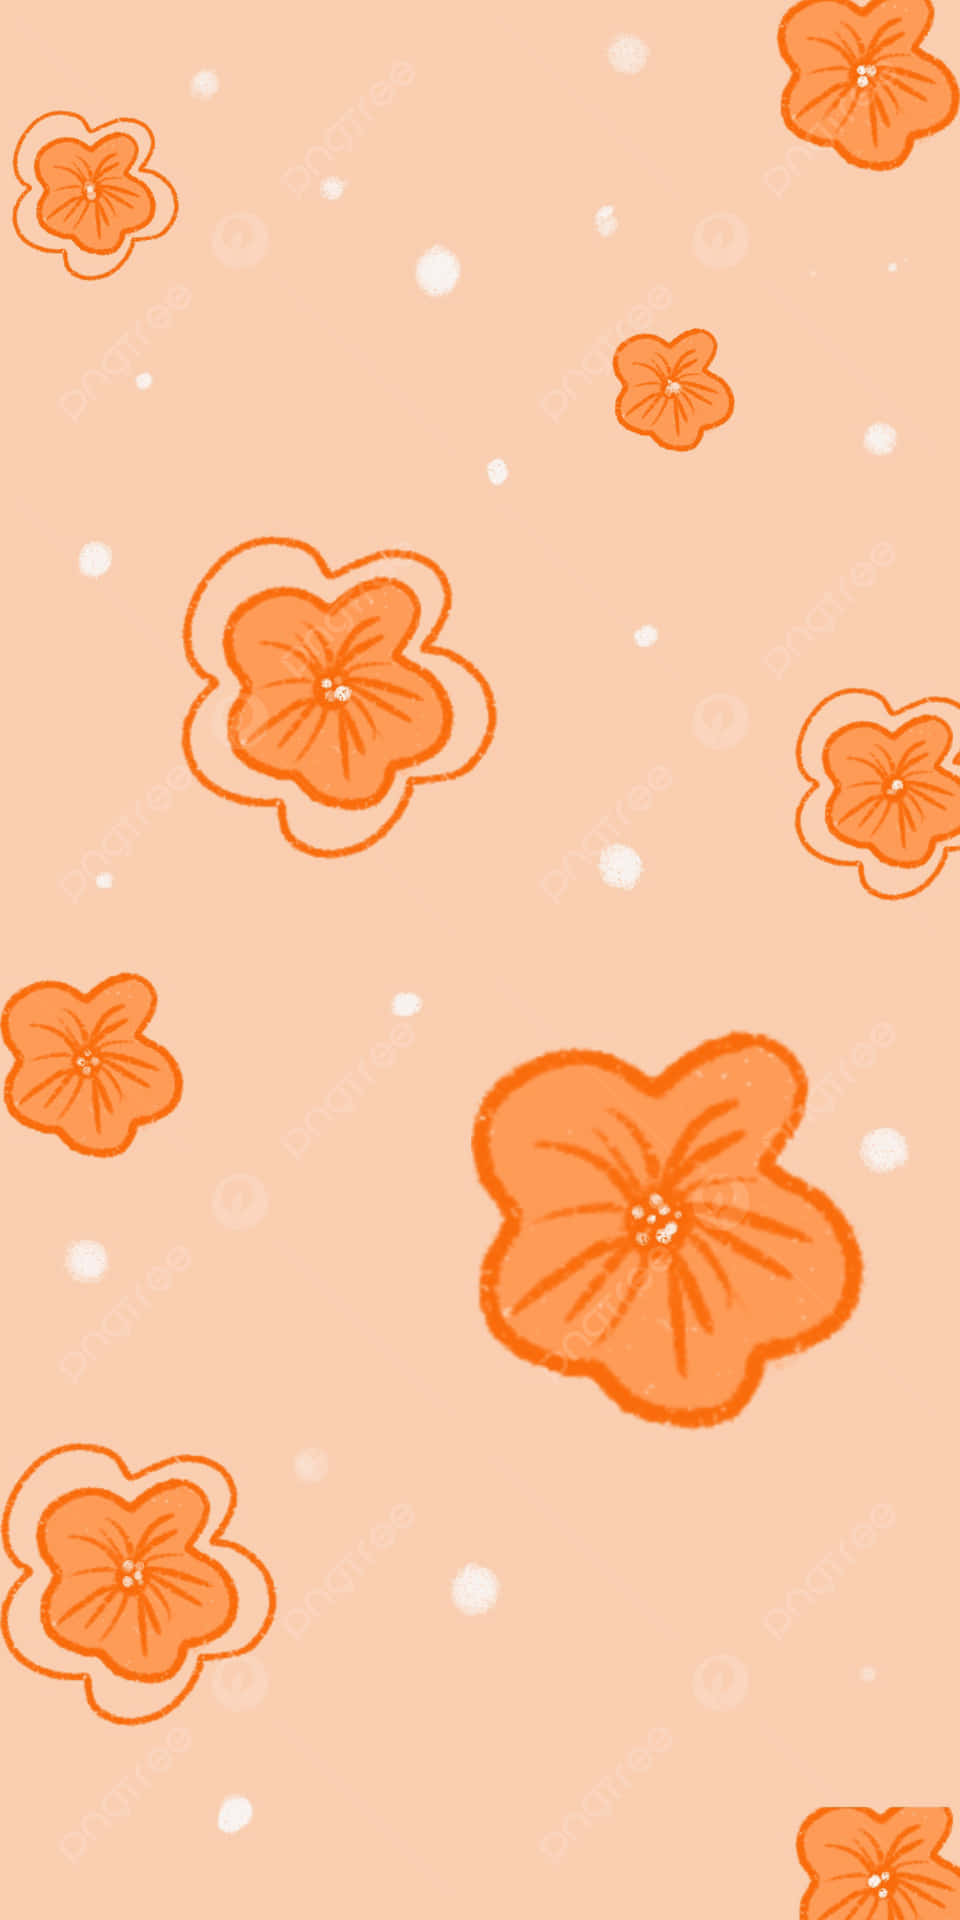 A Playful and Vibrant Cute Orange Patterned Background